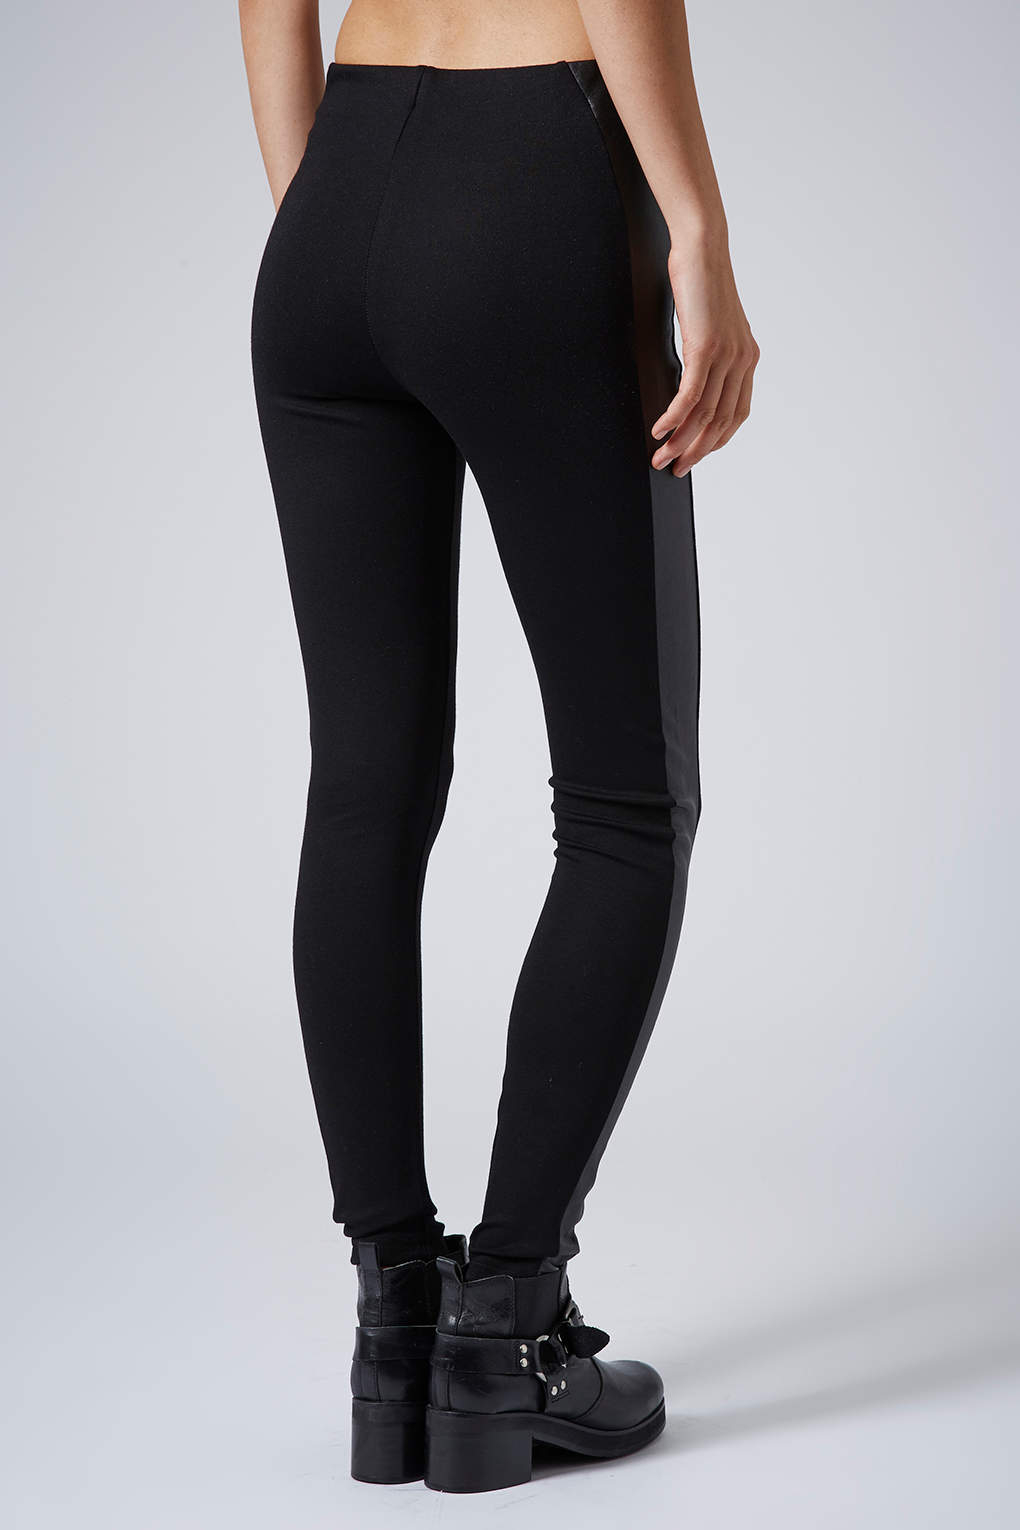 Topshop Leather Look Leggings  International Society of Precision  Agriculture